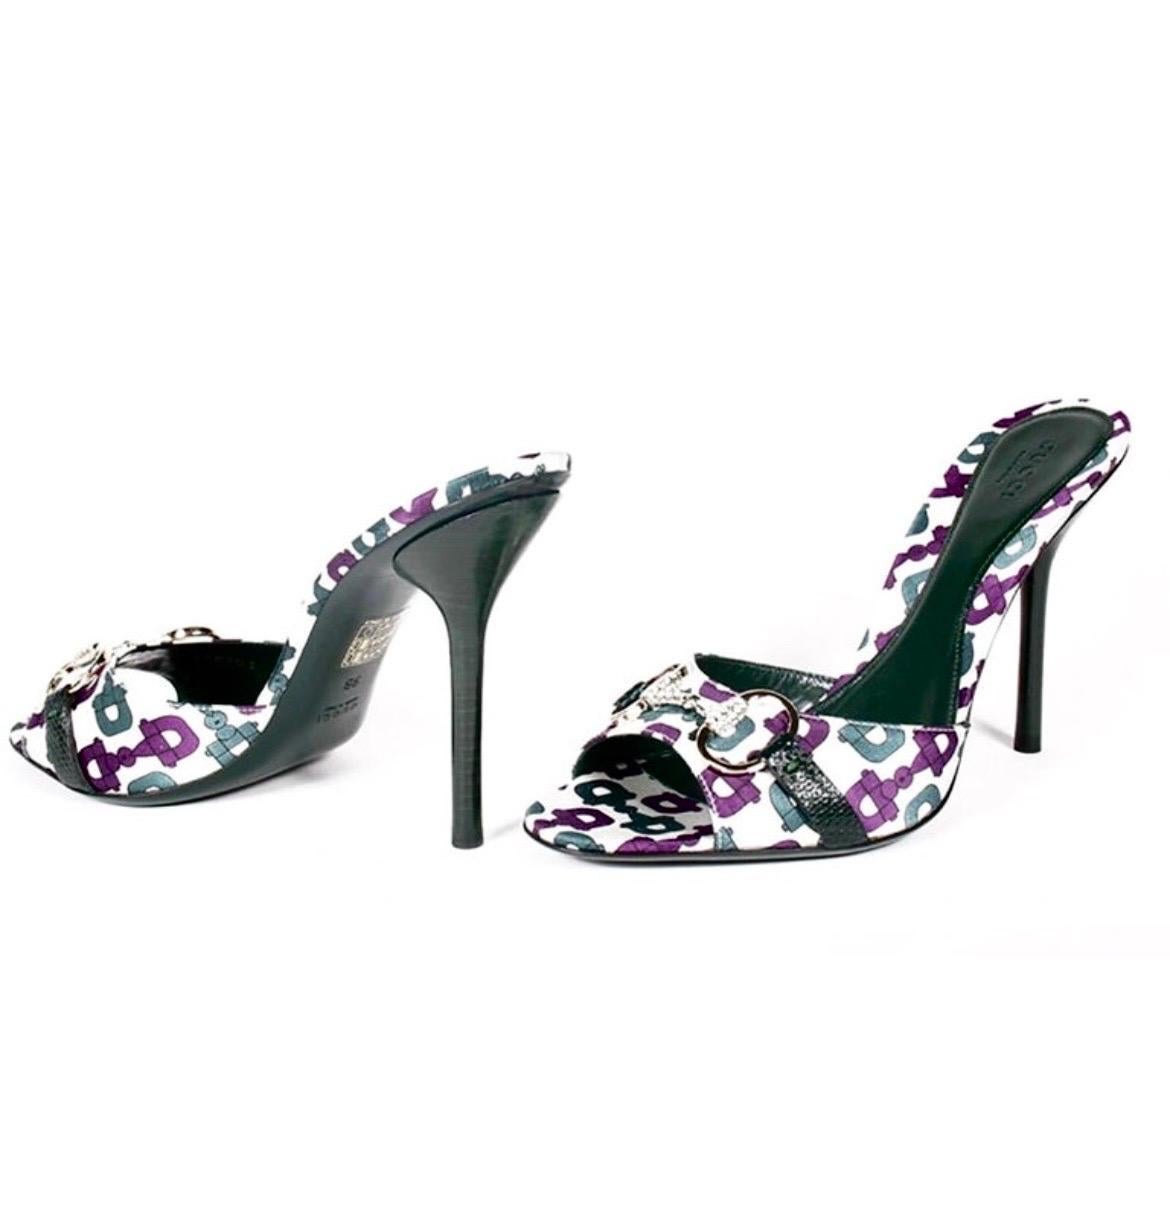 Vintage Gucci White Printed Satin Sandals w/ Crystal horsebit 9.5 – 39.5 NWT For Sale 1